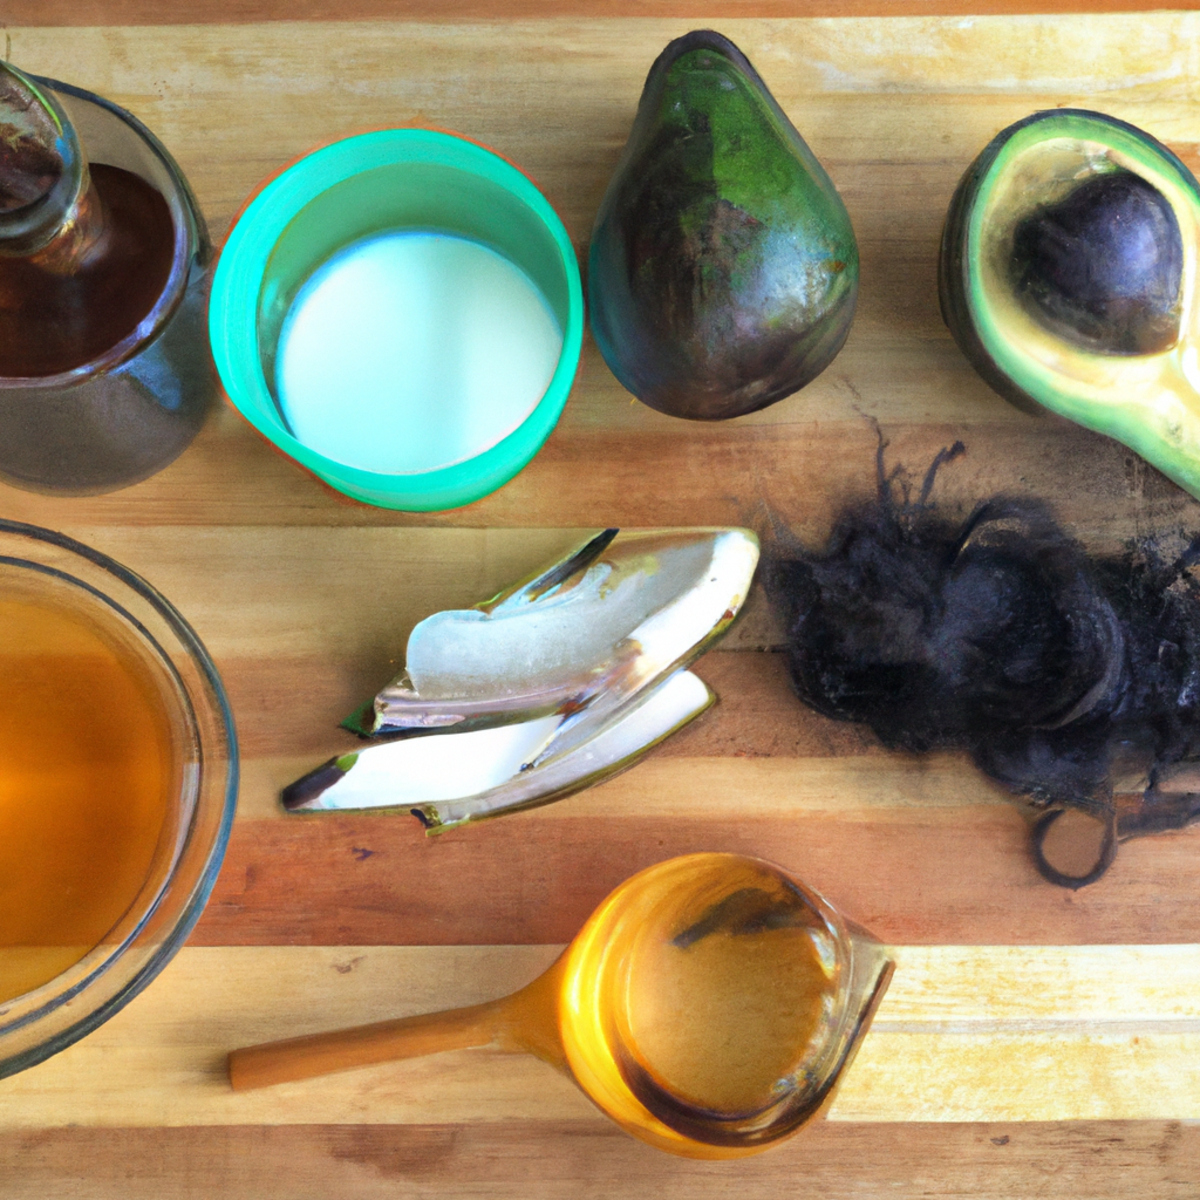 DIY hair care ingredients on wooden table with natural lighting and blurred person in background.